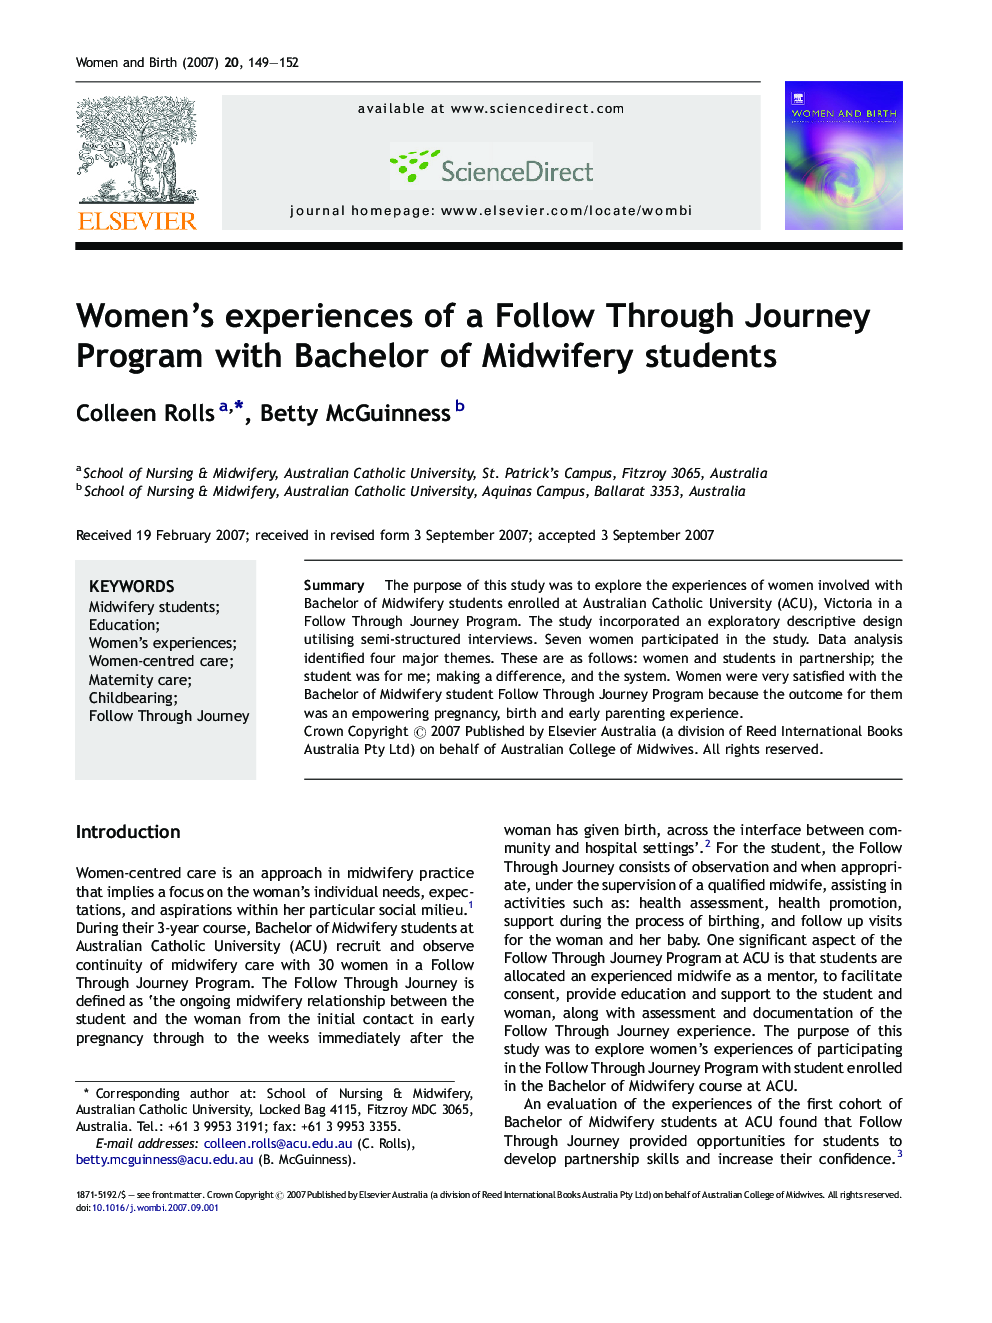 Women's experiences of a Follow Through Journey Program with Bachelor of Midwifery students